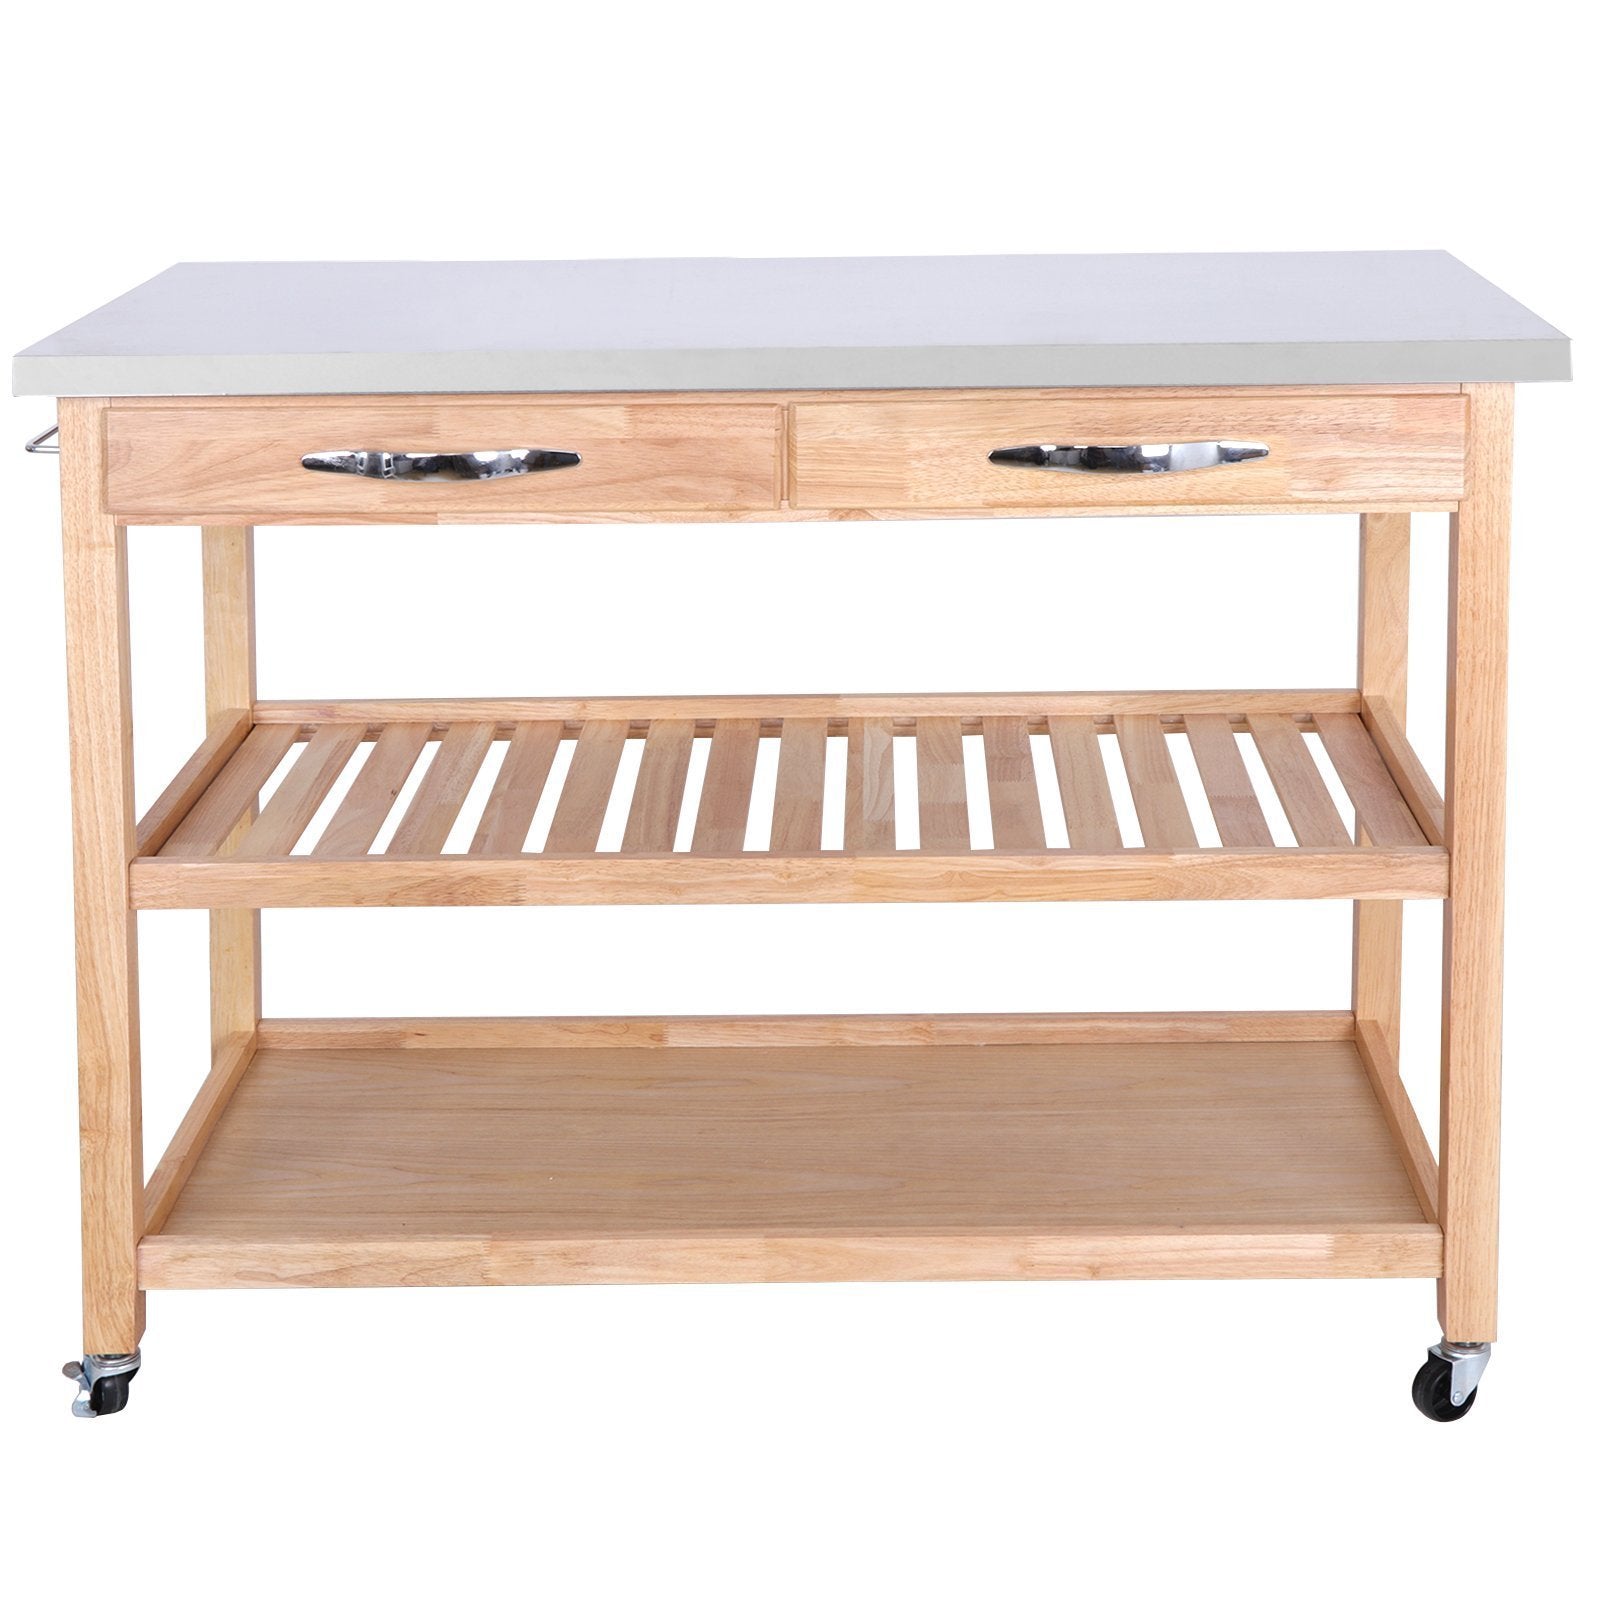 Get zenstyle 3 tier rolling kitchen island utility wood serving cart stainless steel countertop kitchen storage cart w shelves drawers towel rack